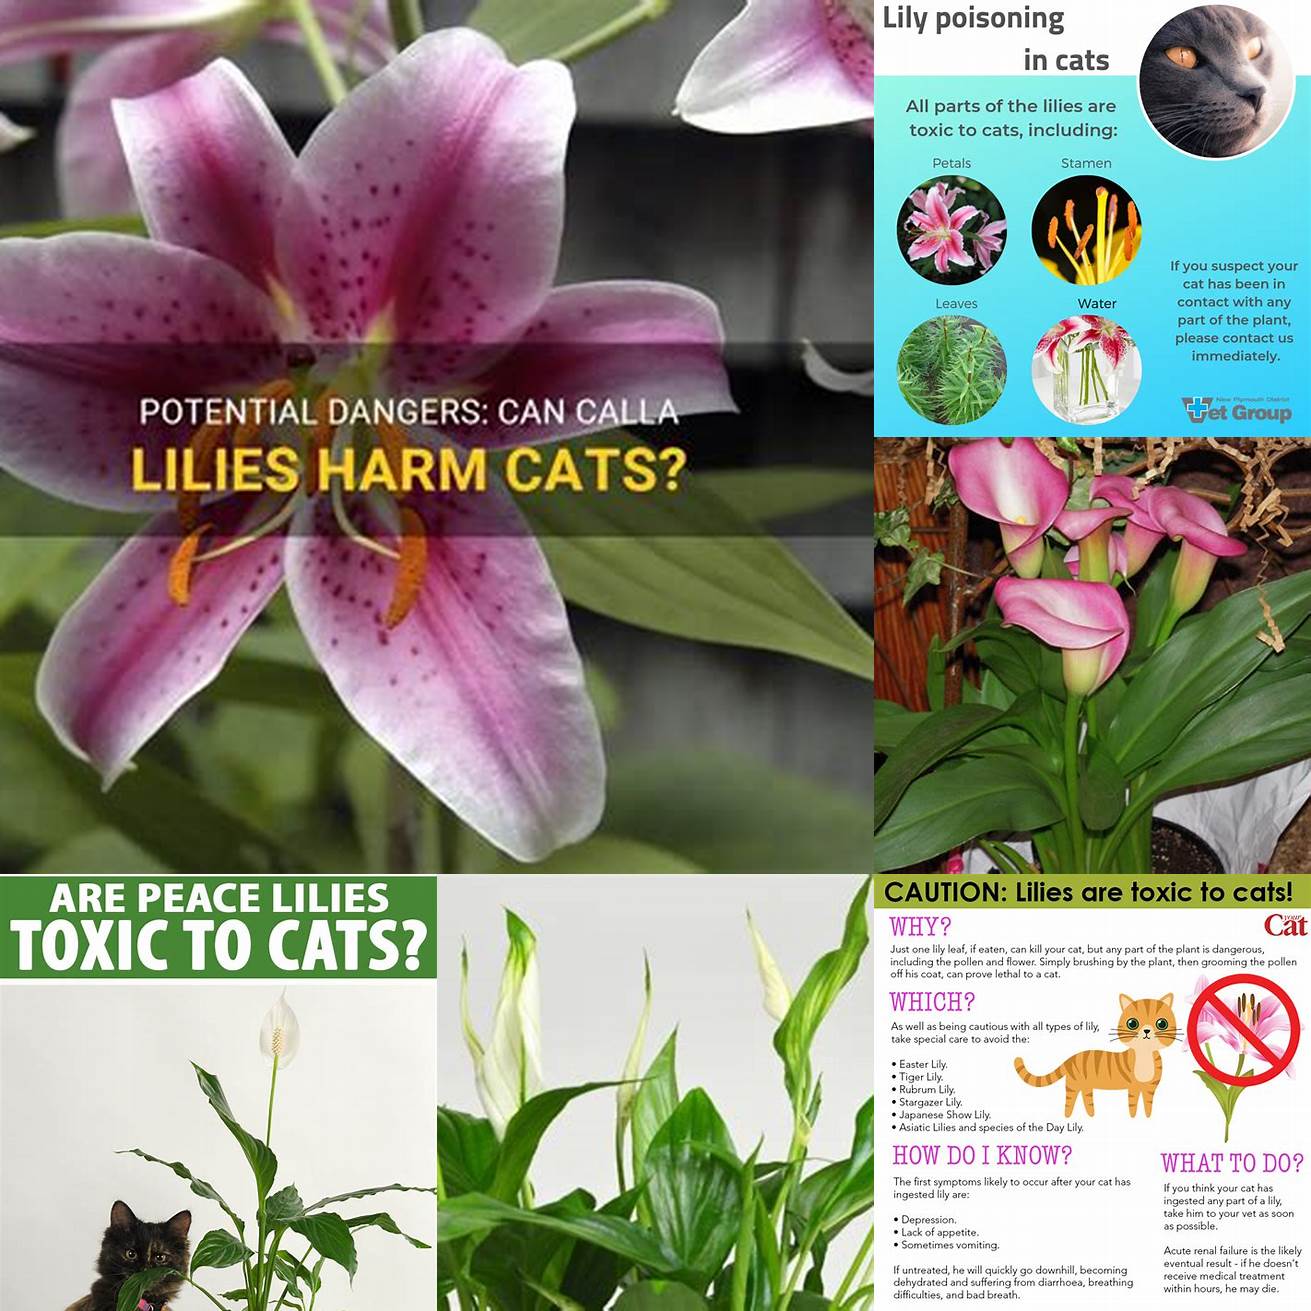 Q Can calla lilies be harmful to other pets